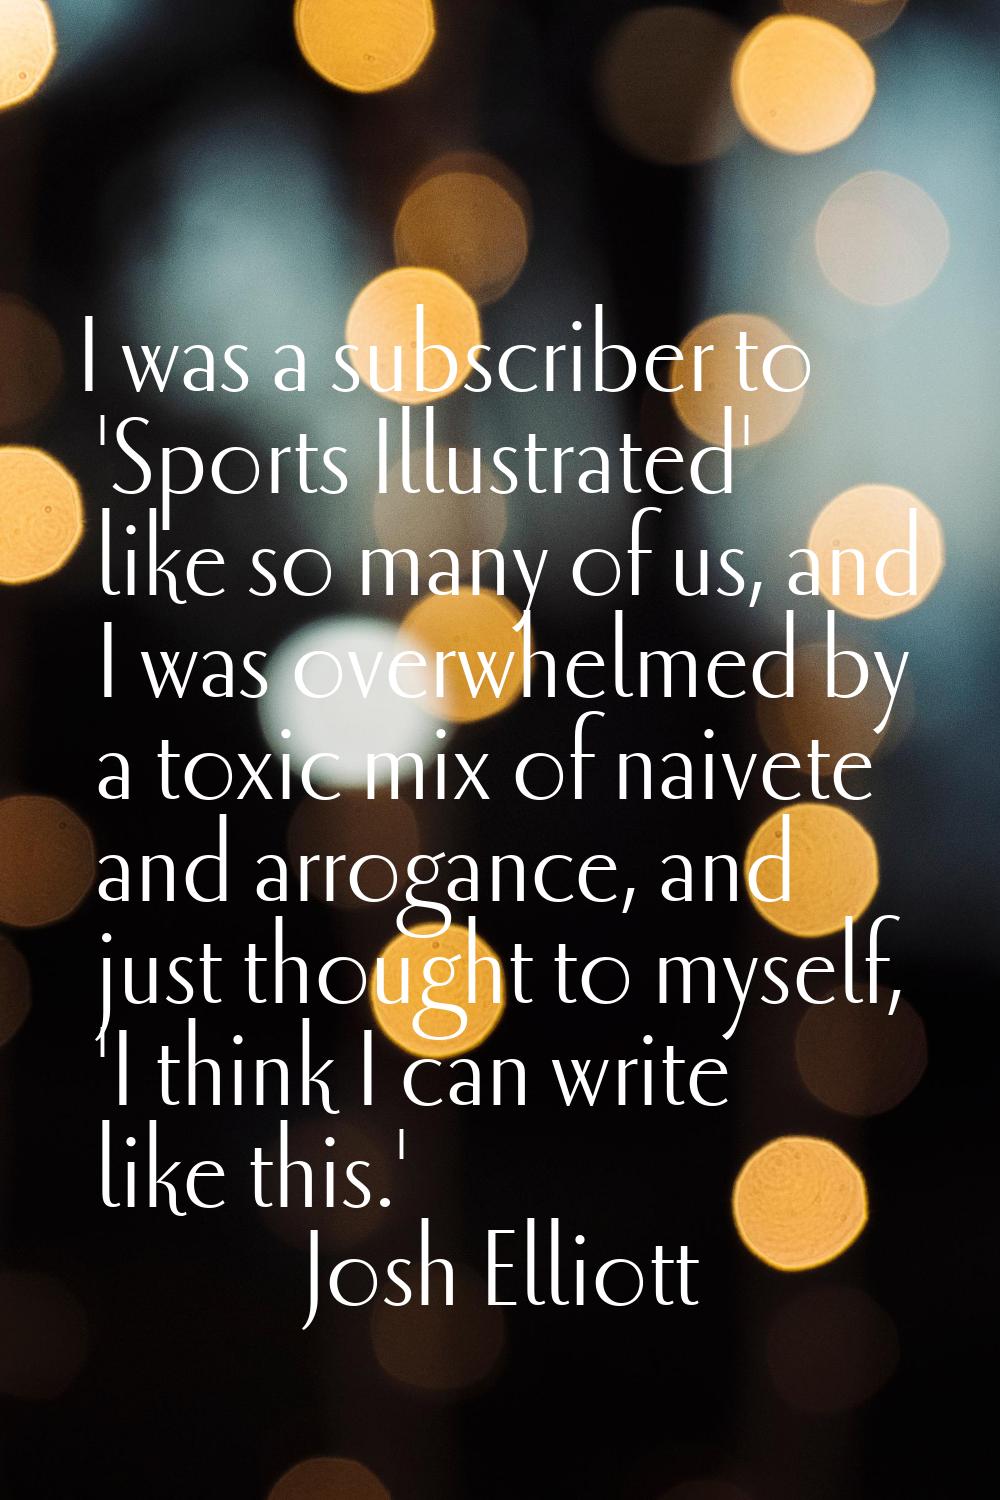 I was a subscriber to 'Sports Illustrated' like so many of us, and I was overwhelmed by a toxic mix